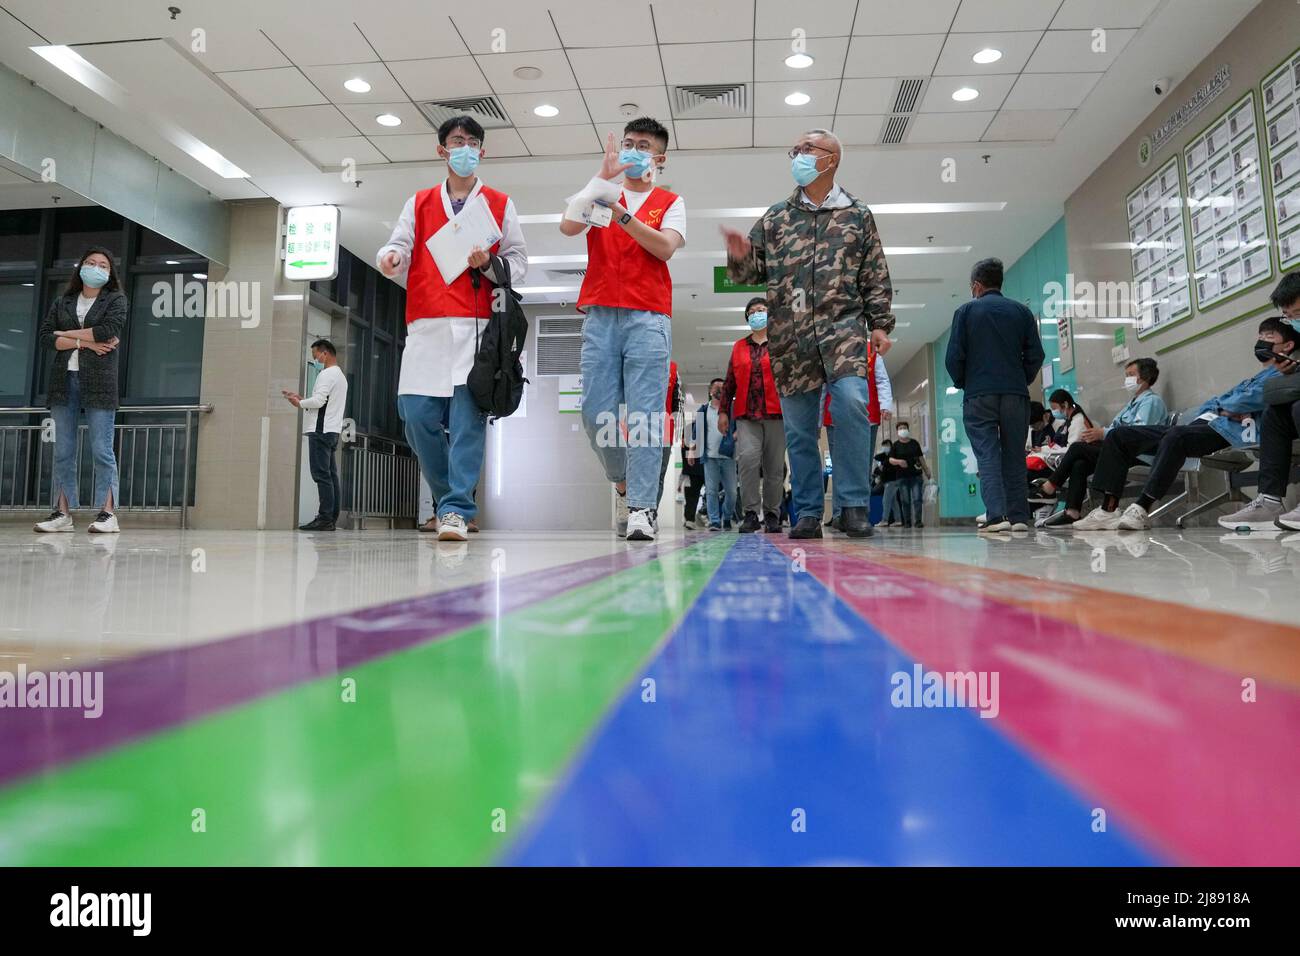 (220514) -- NANJING, May 14, 2022 (Xinhua) -- Chen Xin (C) accompanies a hearing-impaired patient (1st R) to see a doctor in a hospital in Nanjing, east China's Jiangsu Province, May 9, 2022. Chen Xin, a student of Nanjing Polytechnic Institute, also a certified sign language interpreter, established a workshop offering voluntary service for hearing-impaired people in September 2020. So far the workshop has organized over 80 sign language training courses and more than 100 voluntary events with an aggregate service time exceeding 1,000 hours. During COVID-19 pandemic, Chen has made a serie Stock Photo